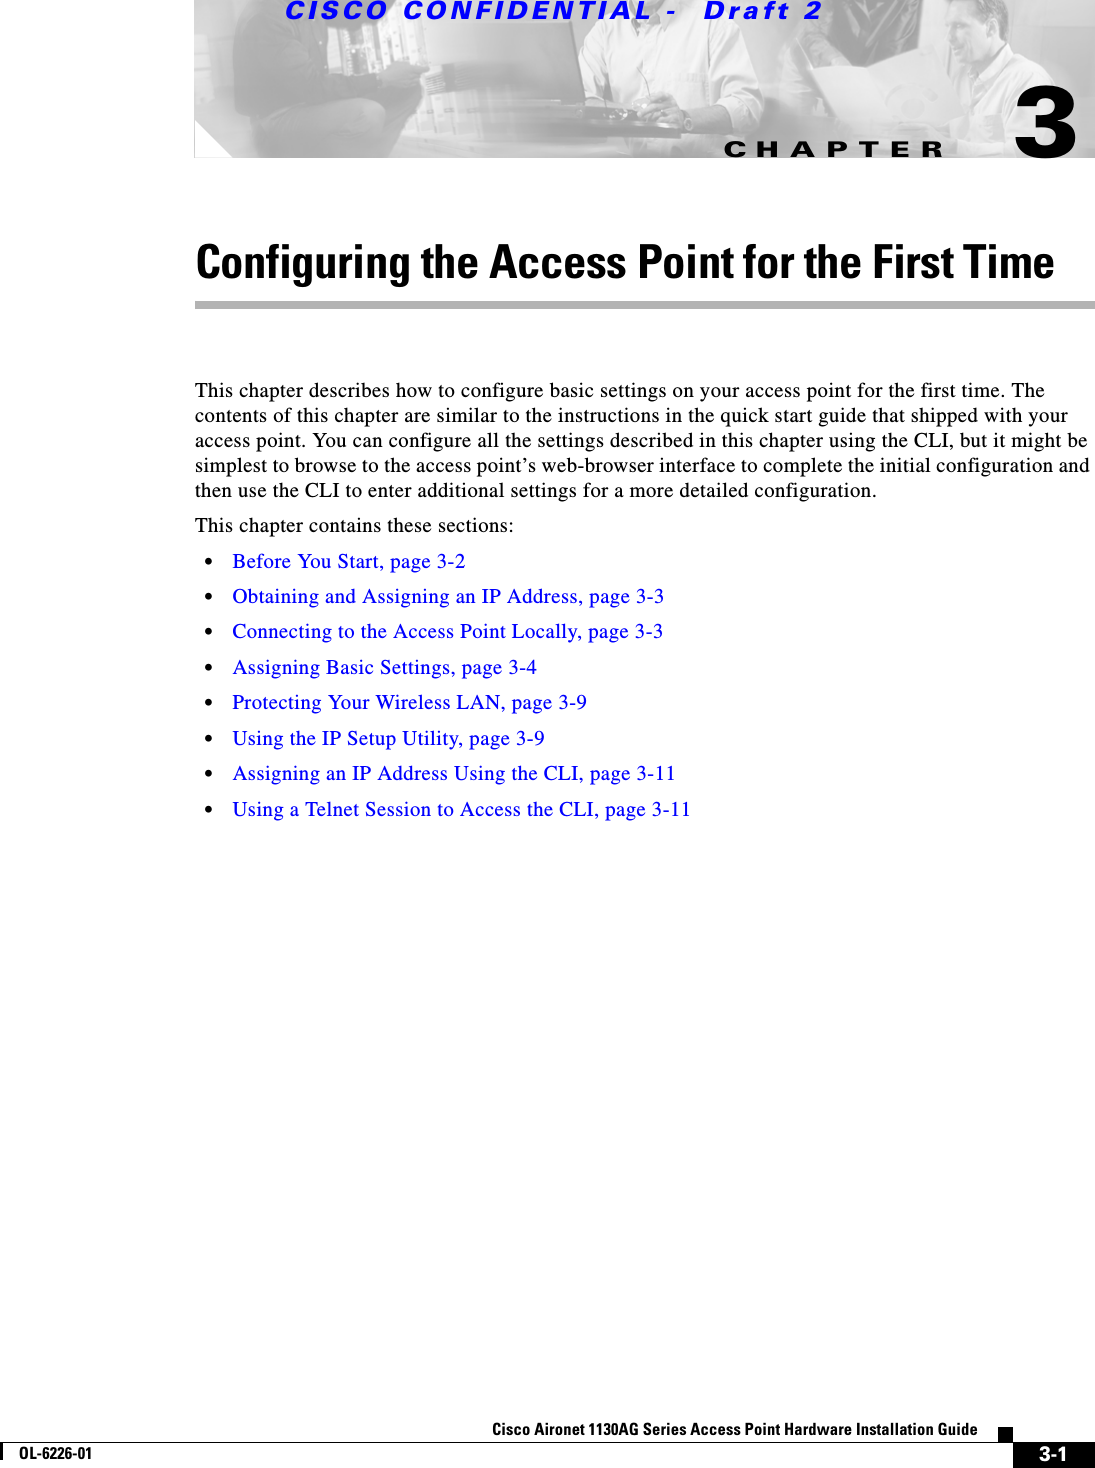 CHAPTER CISCO CONFIDENTIAL -  Draft 23-1Cisco Aironet 1130AG Series Access Point Hardware Installation GuideOL-6226-013Configuring the Access Point for the First TimeThis chapter describes how to configure basic settings on your access point for the first time. The contents of this chapter are similar to the instructions in the quick start guide that shipped with your access point. You can configure all the settings described in this chapter using the CLI, but it might be simplest to browse to the access point’s web-browser interface to complete the initial configuration and then use the CLI to enter additional settings for a more detailed configuration. This chapter contains these sections:•Before You Start, page 3-2•Obtaining and Assigning an IP Address, page 3-3•Connecting to the Access Point Locally, page 3-3•Assigning Basic Settings, page 3-4•Protecting Your Wireless LAN, page 3-9•Using the IP Setup Utility, page 3-9•Assigning an IP Address Using the CLI, page 3-11•Using a Telnet Session to Access the CLI, page 3-11